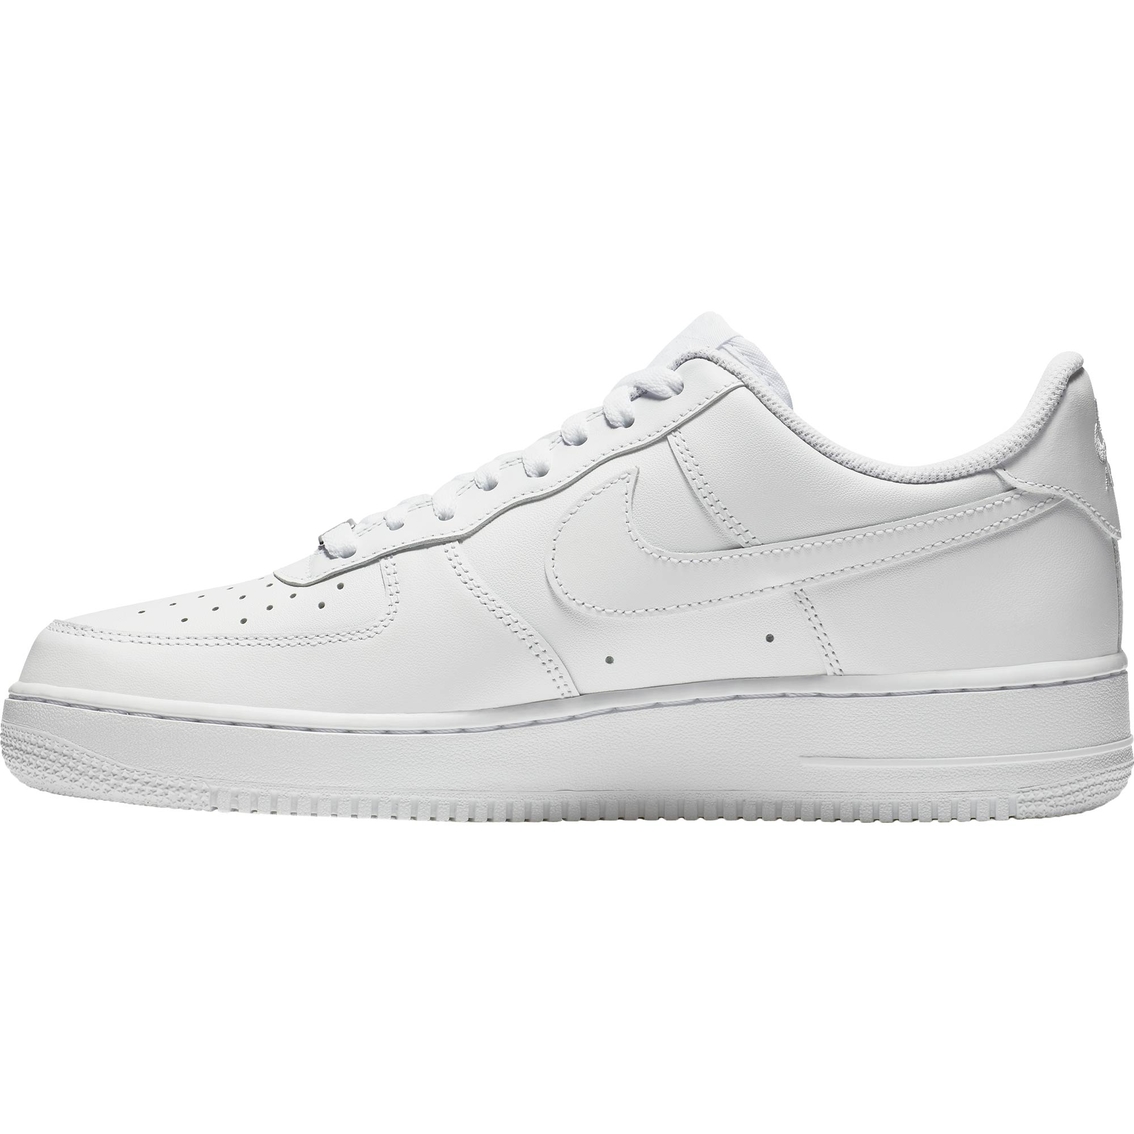 Nike Men's Air Force 1 07 Shoes - Image 8 of 8